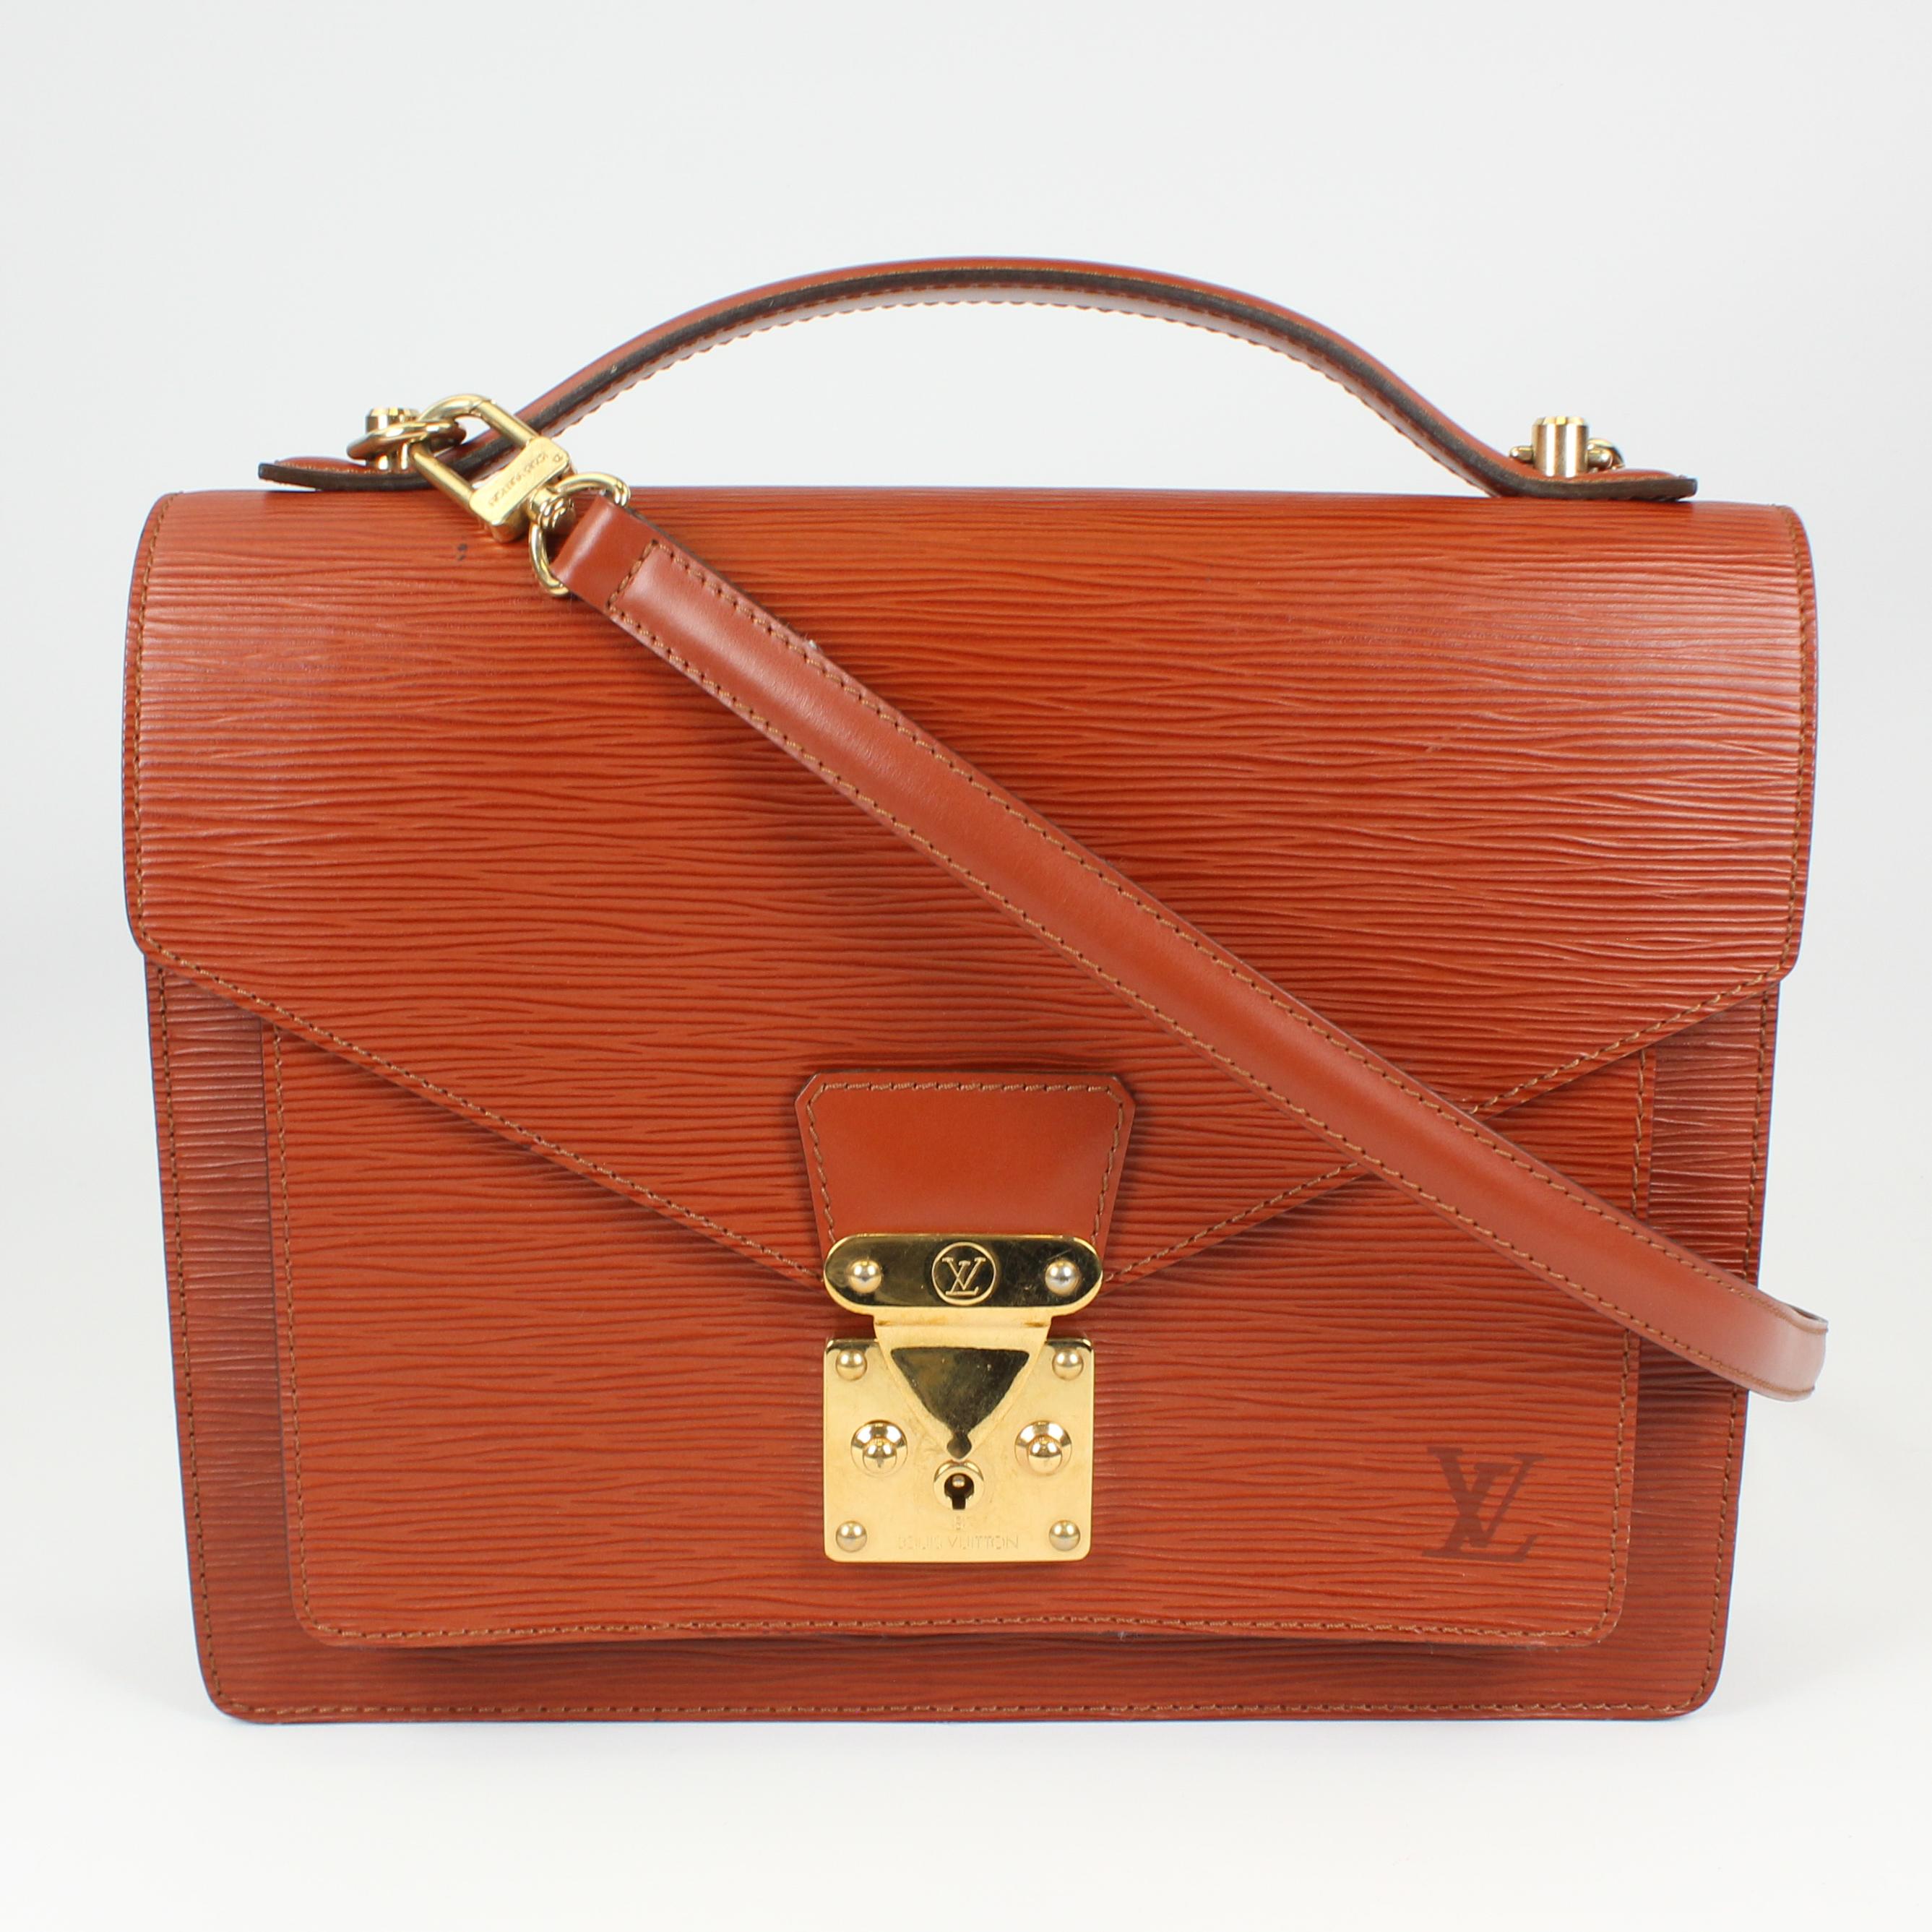 This is a rare and hard to find LV bag that is coveted by many fashionistas. The Louis Vuitton epi leather Monceau briefcase bag features an elegant structured design conceived as a small briefcase. It also has an S-lock closure and a shoulder